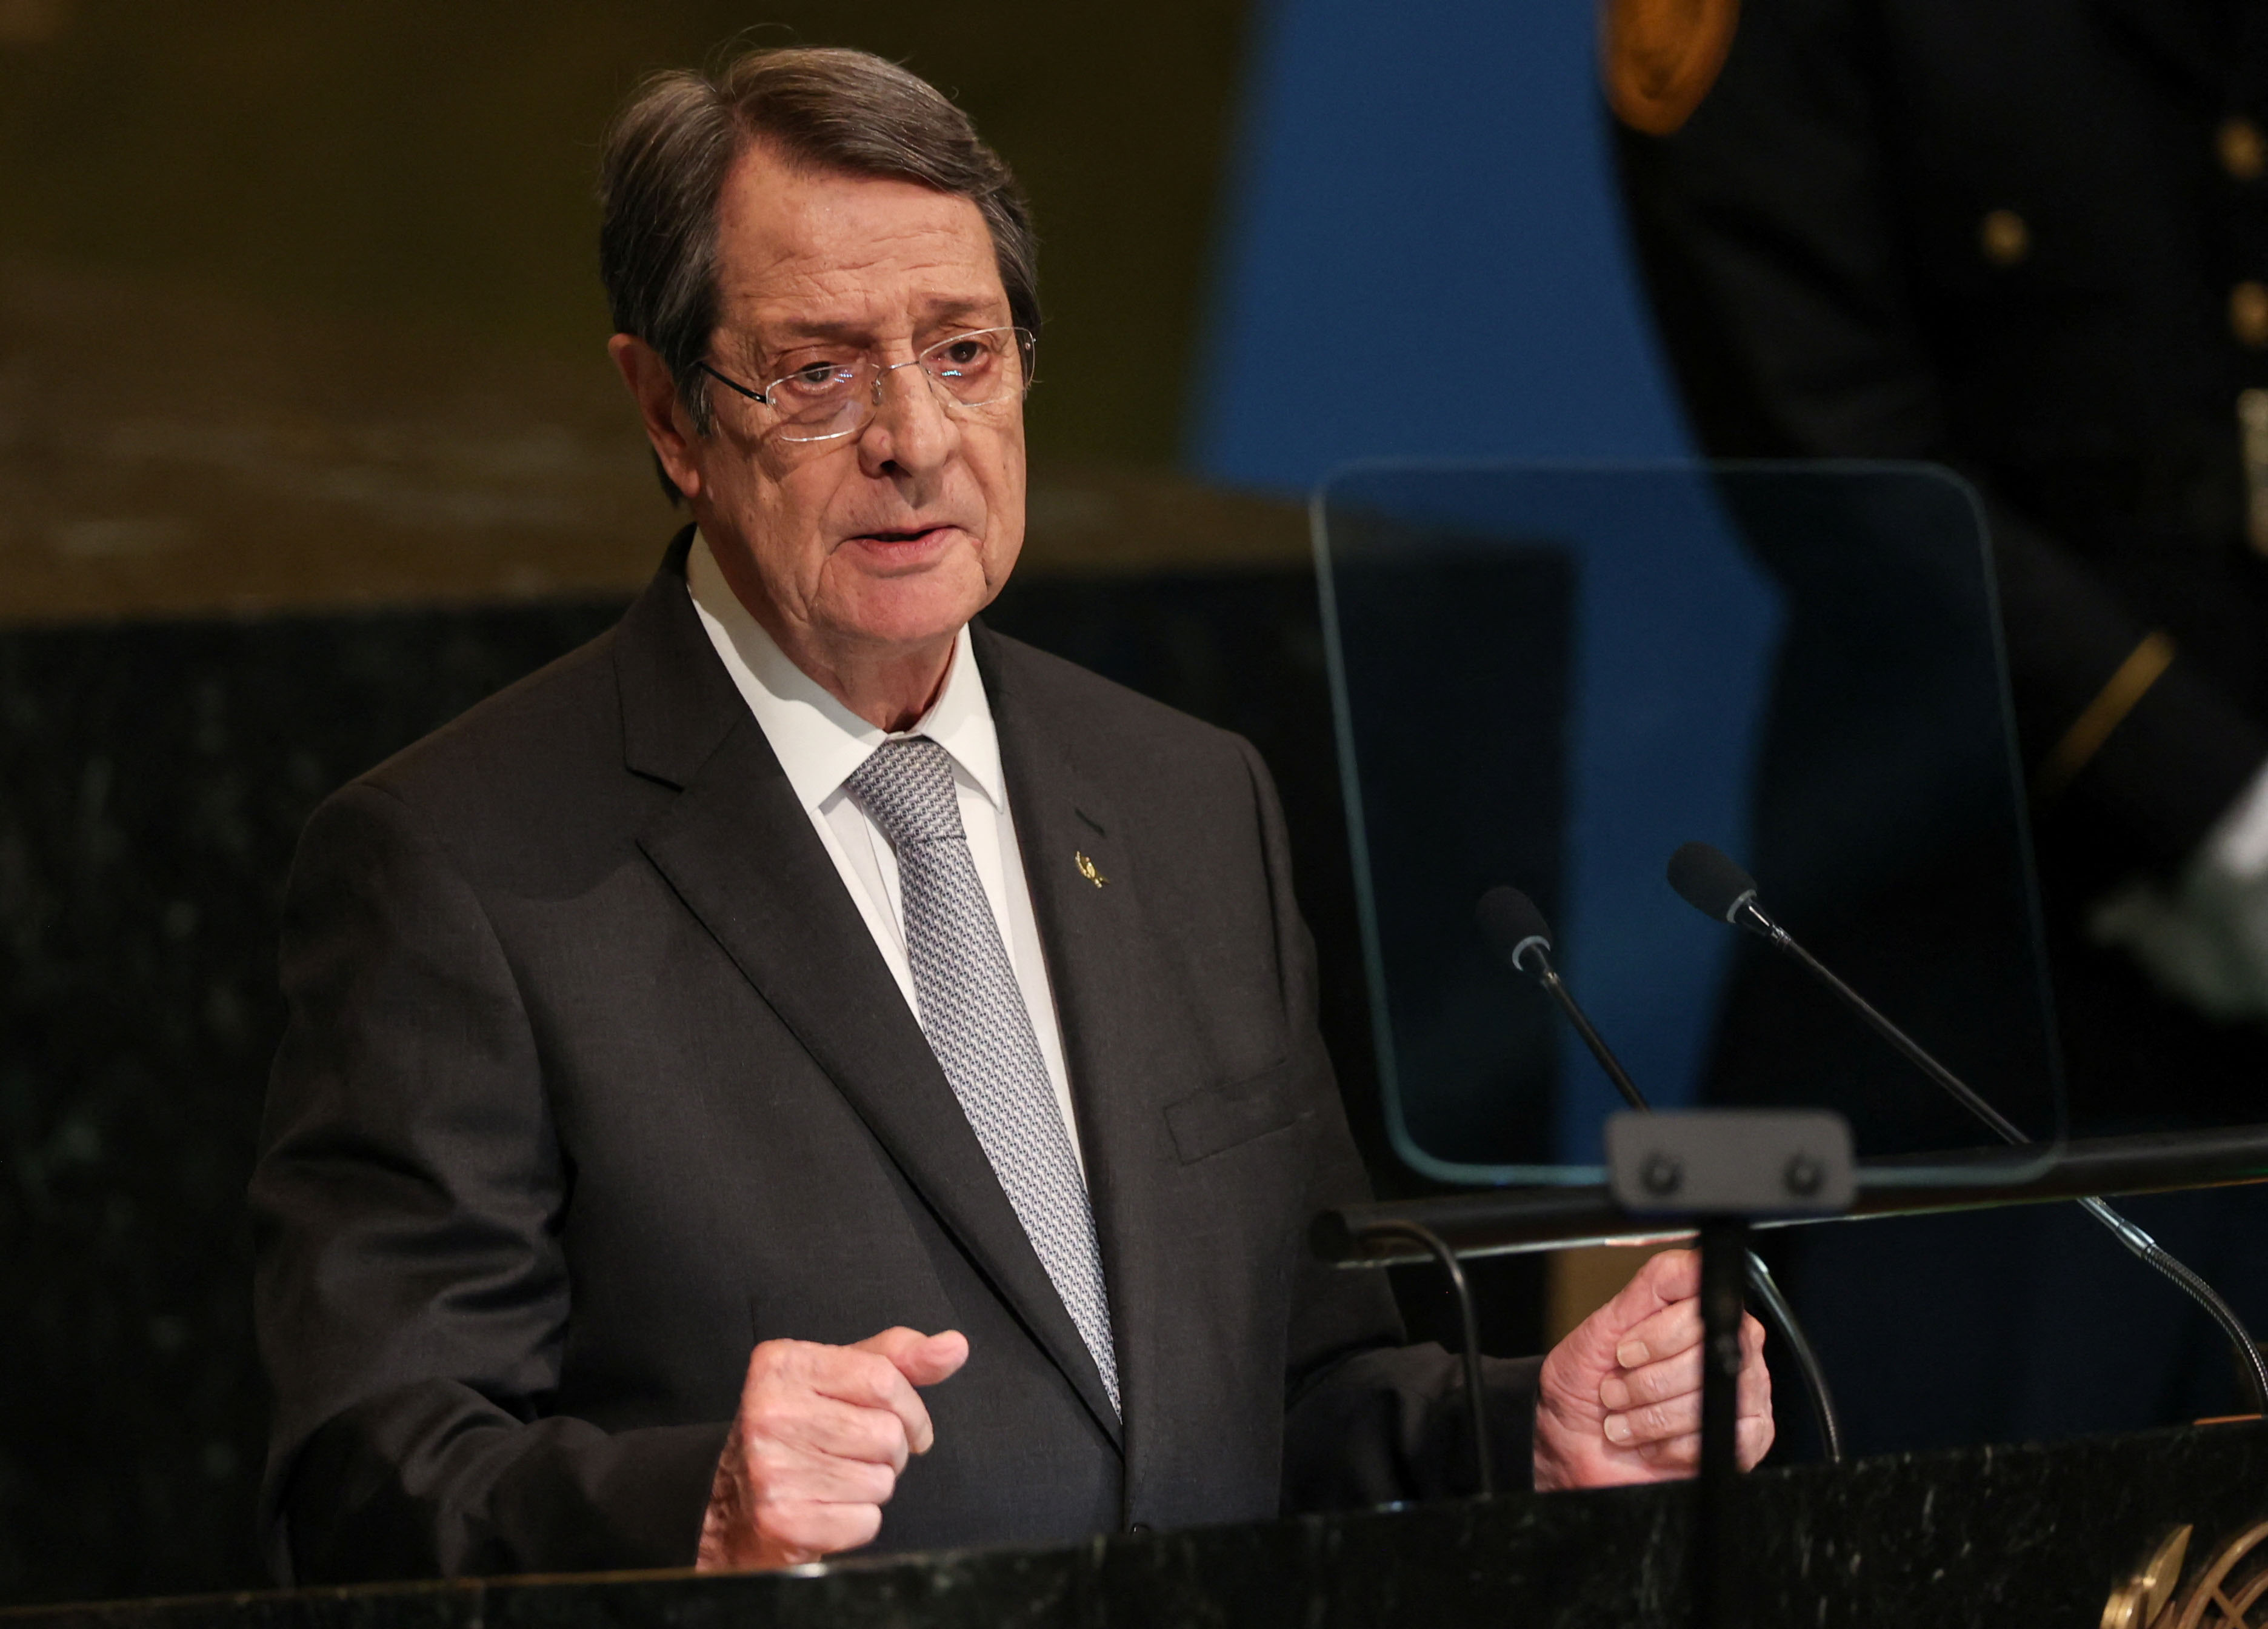 image Anastasiades plays down presidential elections comments